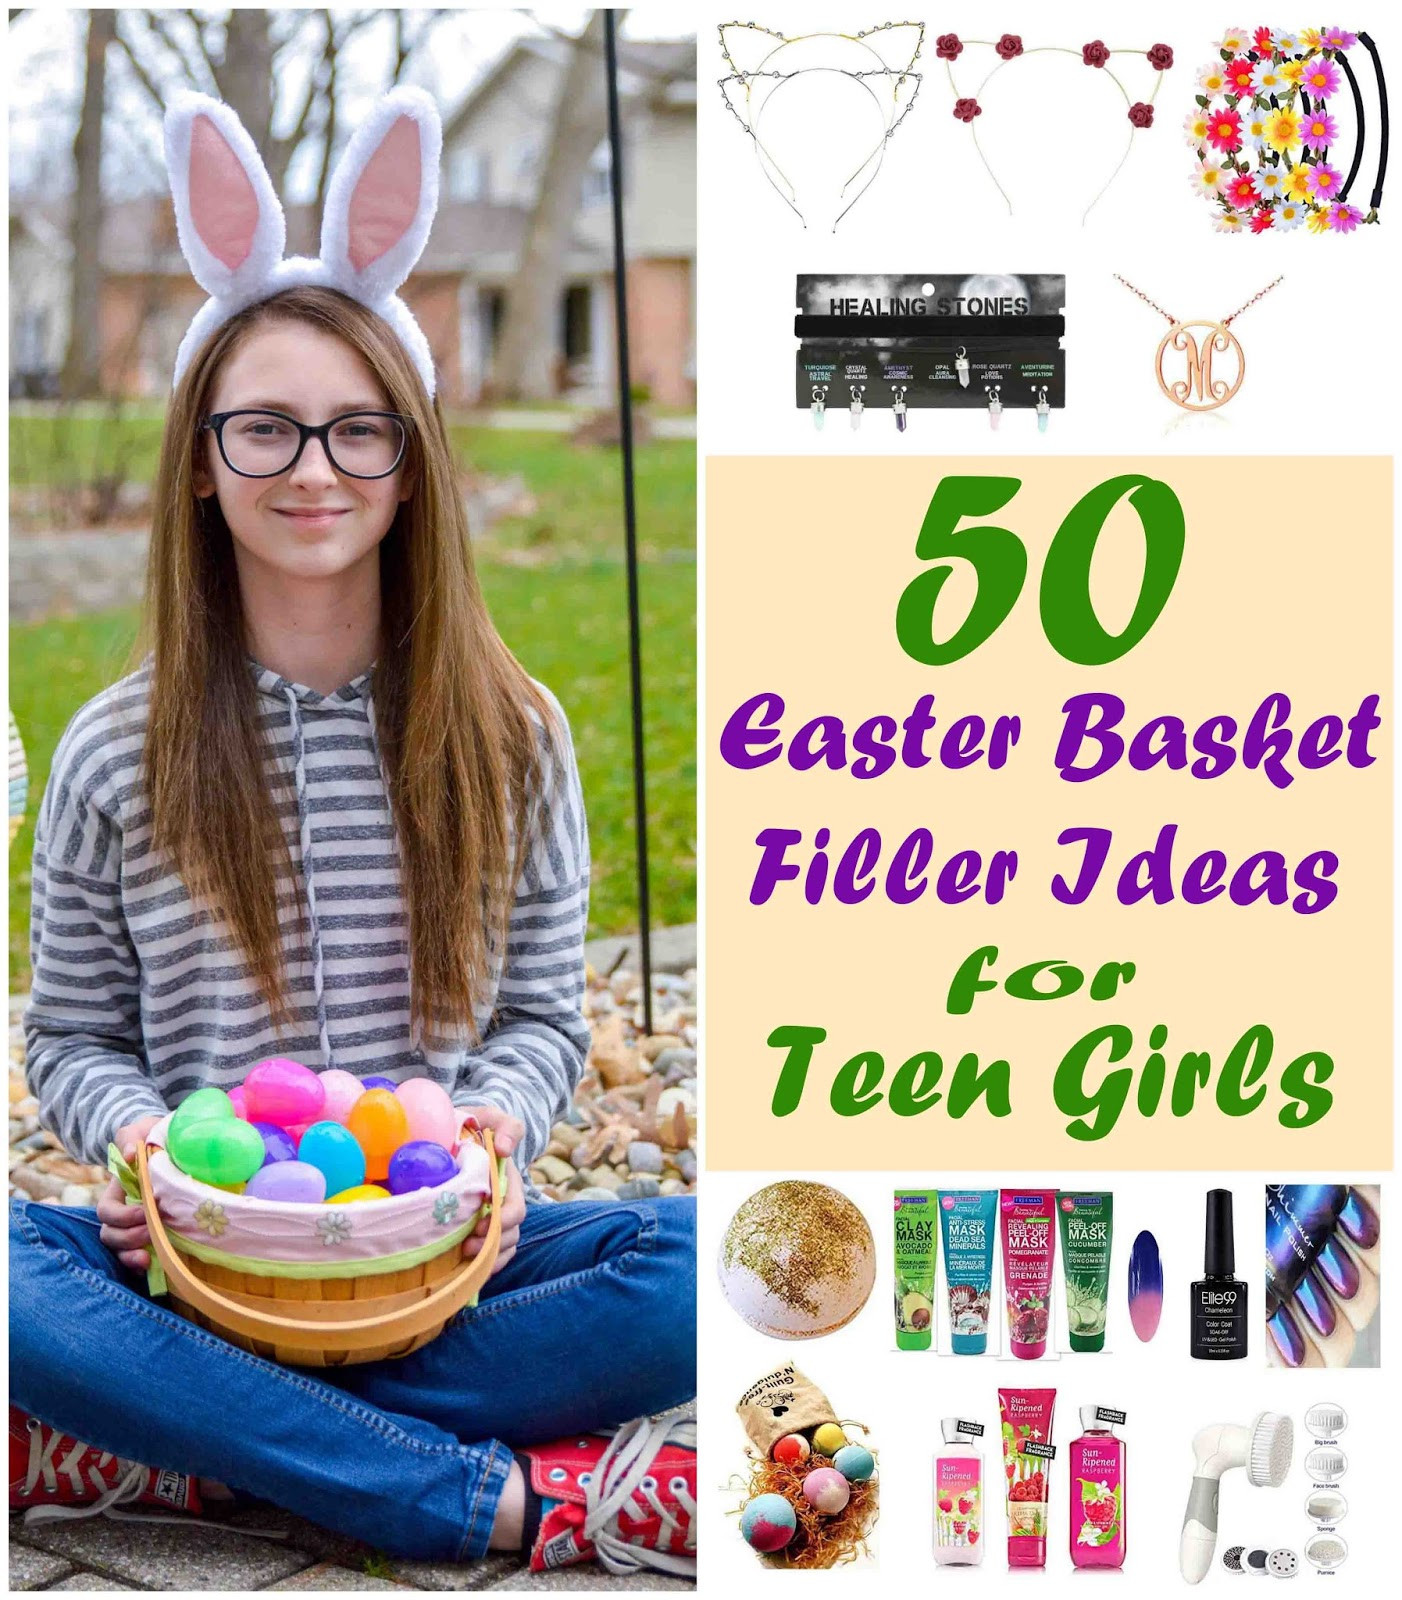 Easter Gifts For Girls
 Theresa s Mixed Nuts Allison s Top 50 Easter Basket